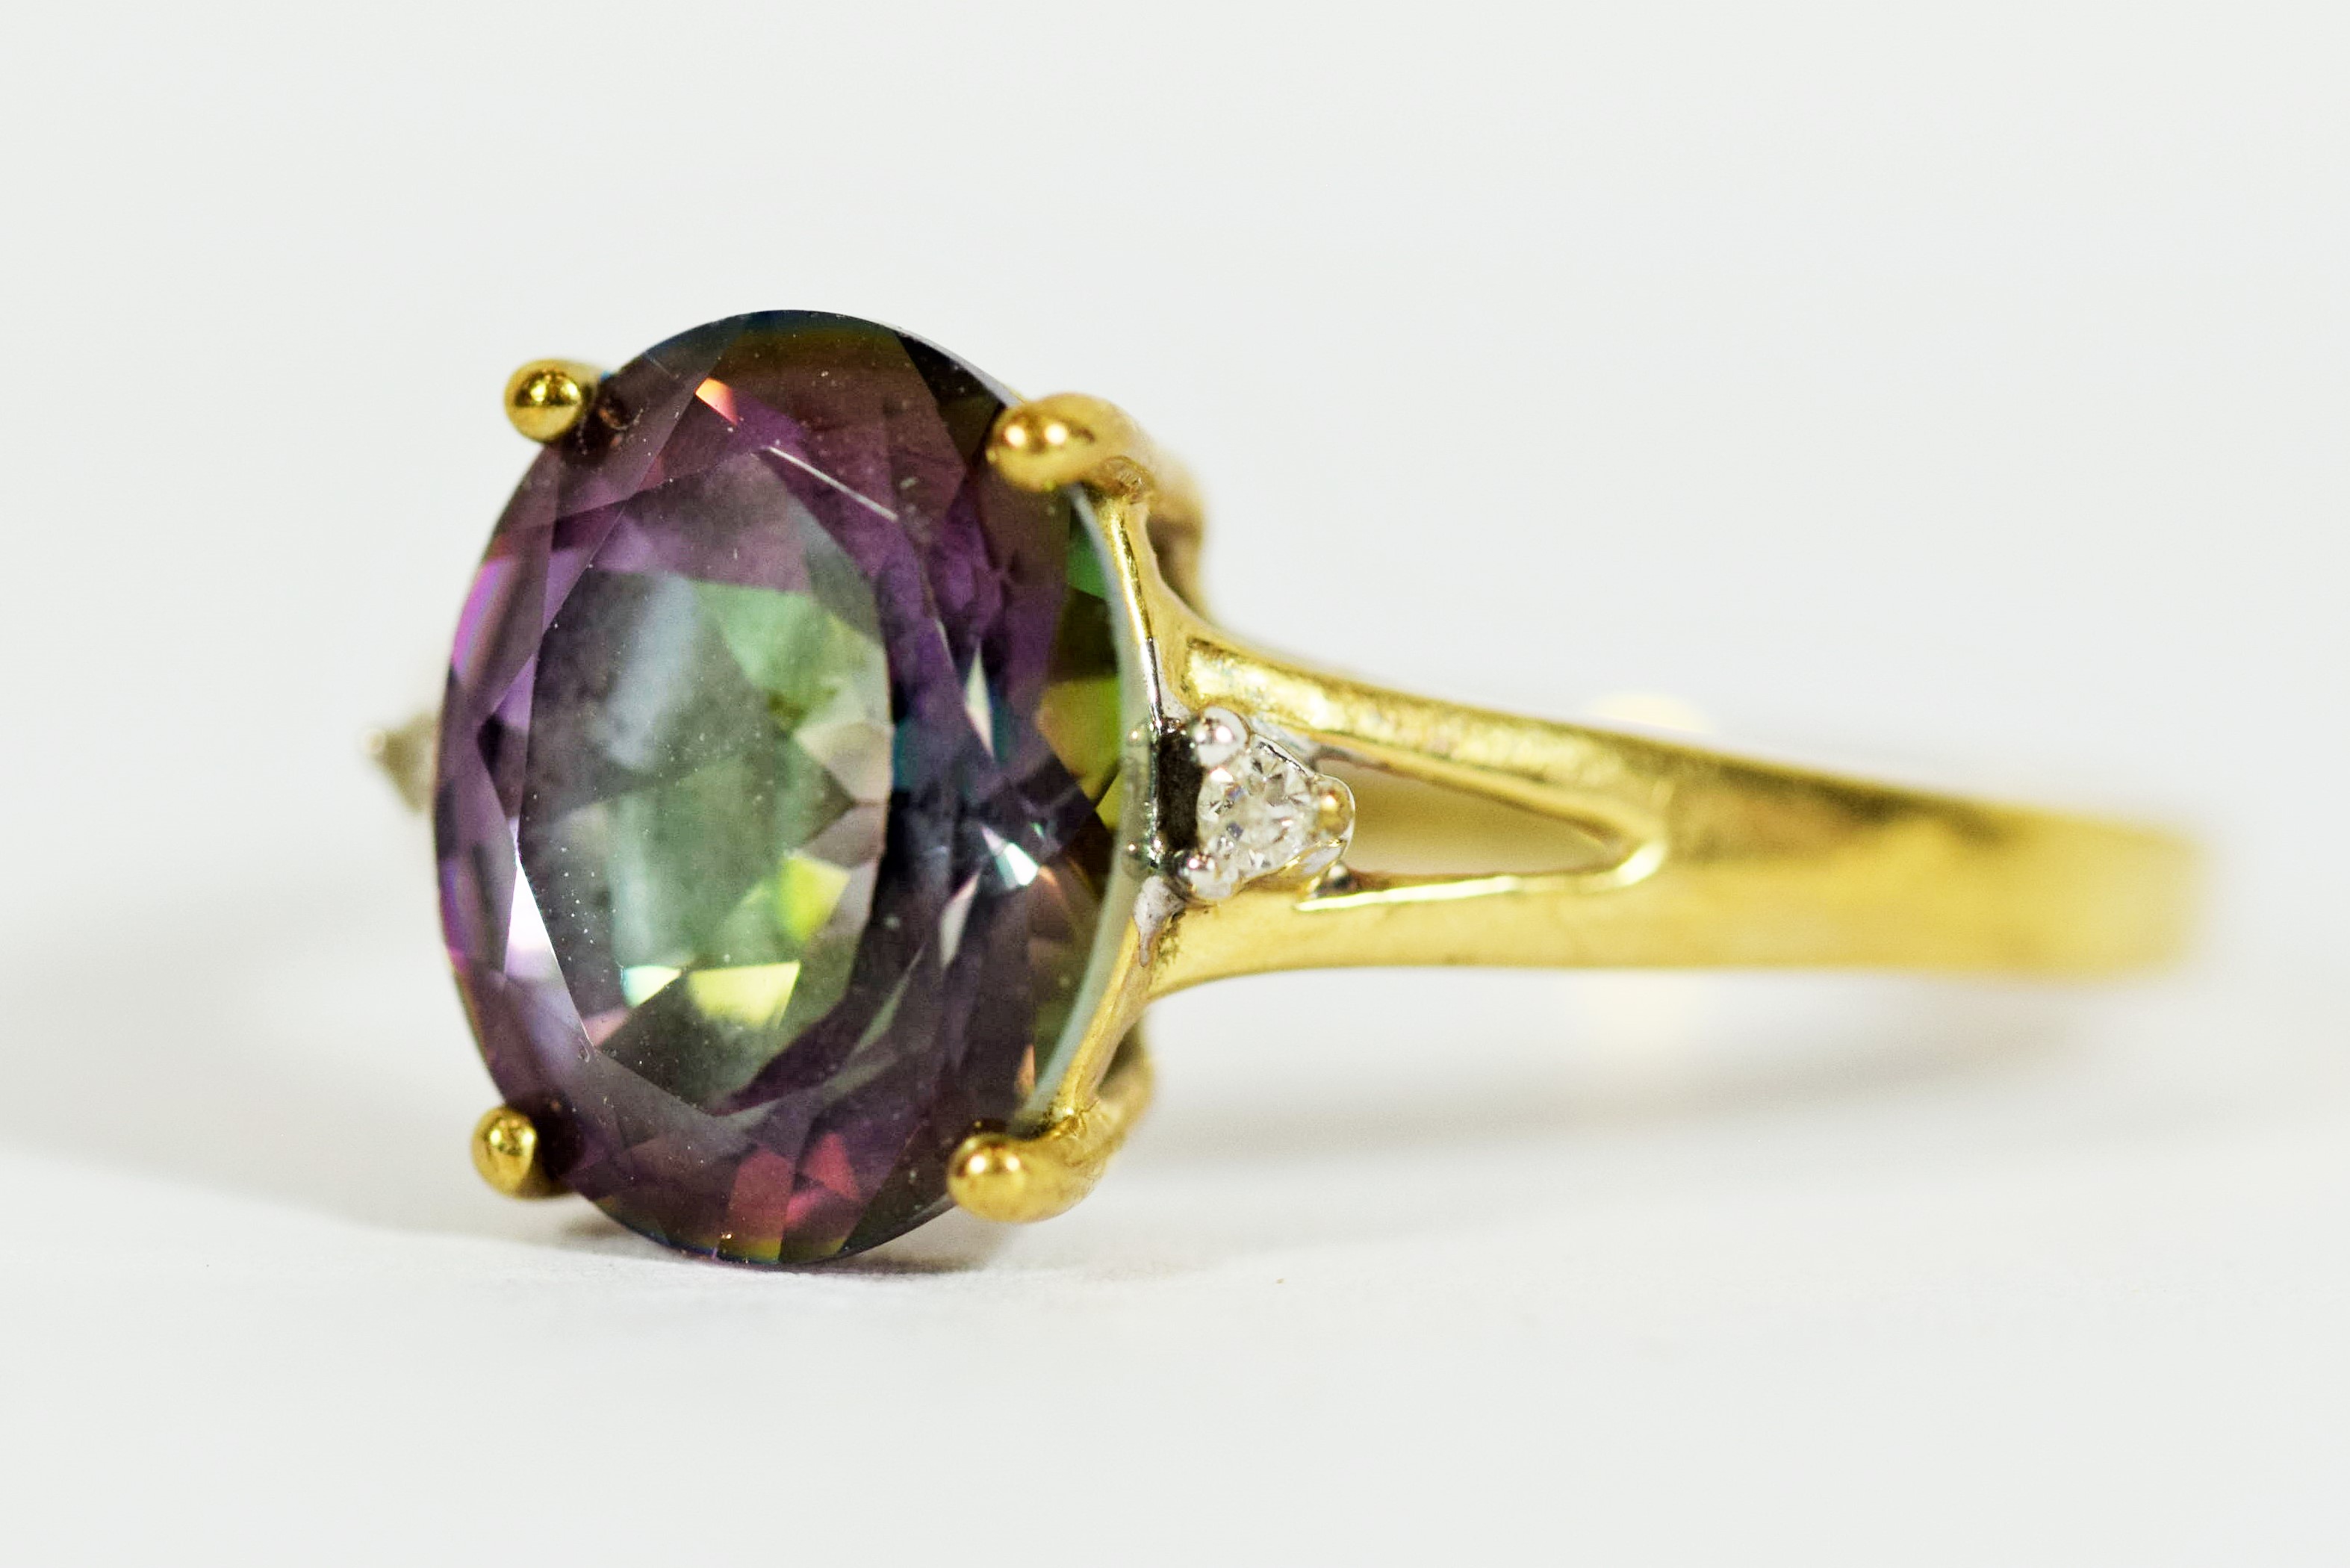 9ct Yellow Gold ring set with a Central Mystic Topaz which measures 11 x 8 mm, Accompanied by two Me - Image 2 of 3